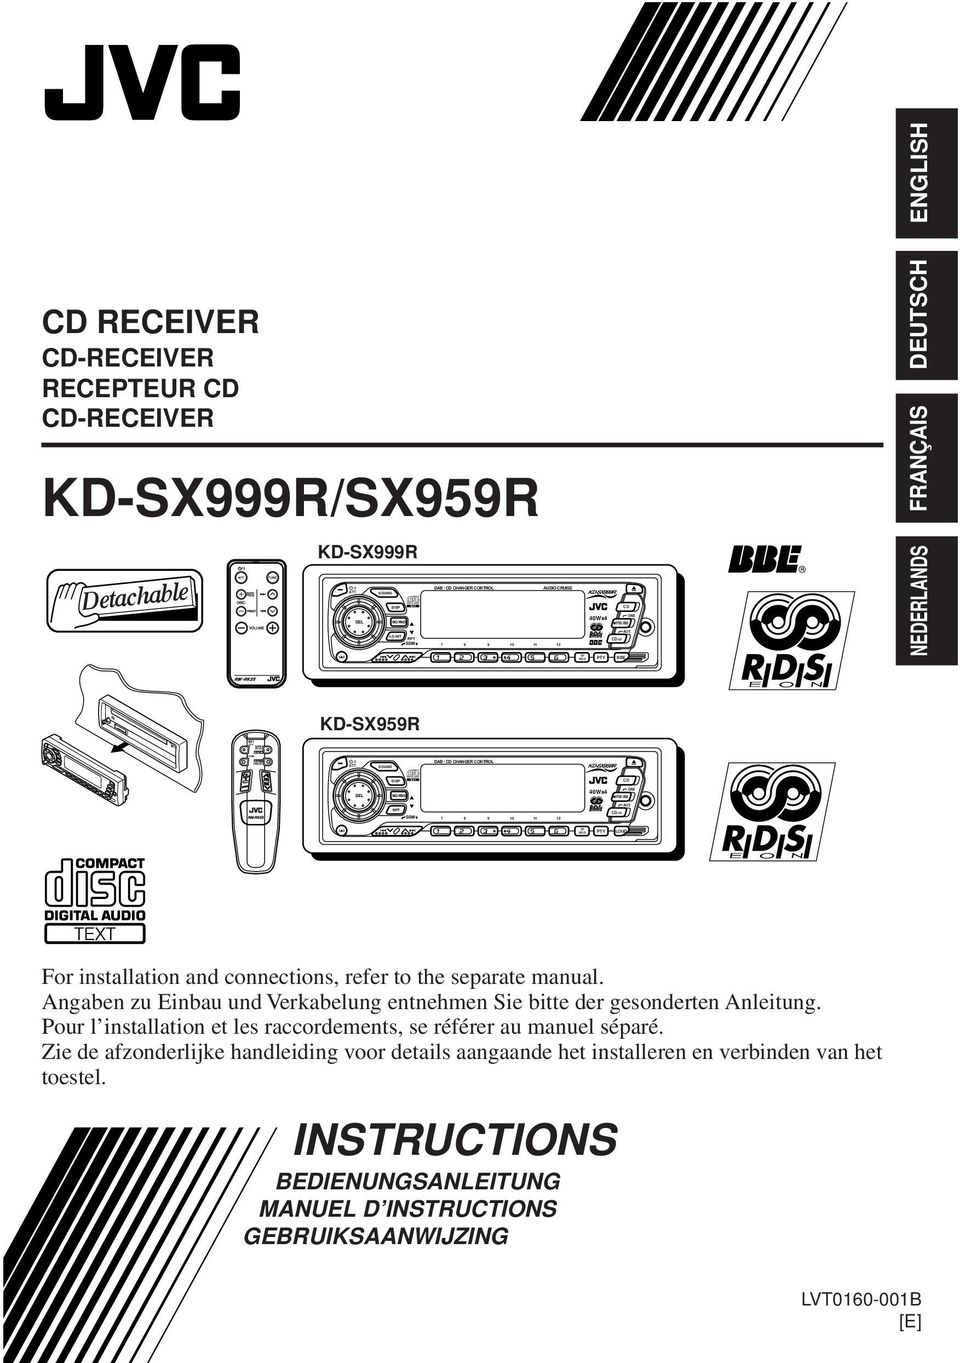 NEDERLANDS KD-SX959R DAB / CD CHANGER CONTROL KD-SX959R SEL 40Wx4 C D FM/AM SSM TP RDS PTY LOUD For installation and connections, refer to the separate manual.